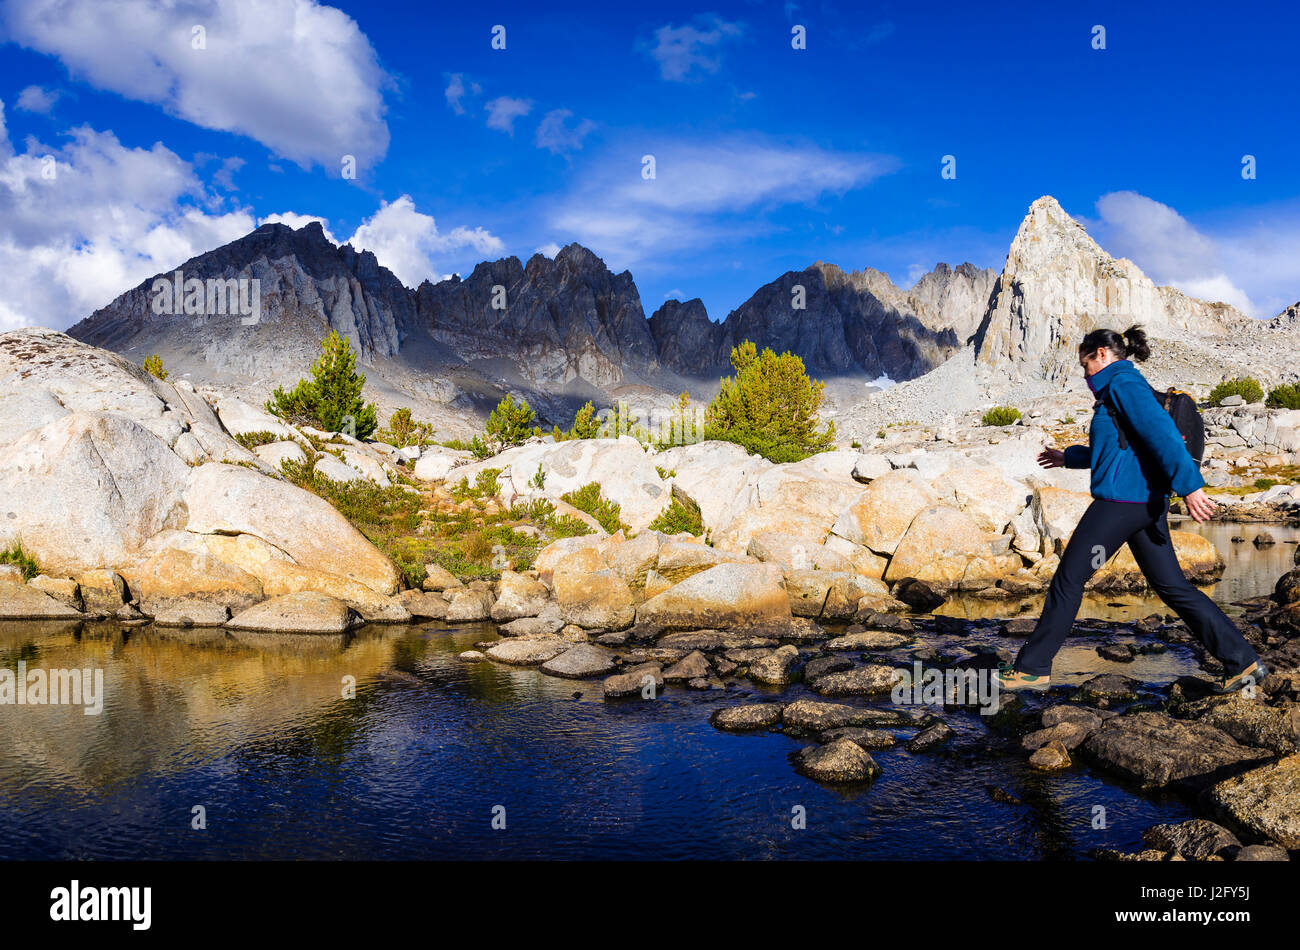 Hiker under Isosceles Peak and the Palisades in Dusy Basin, Kings Canyon National Park, Usa (MR) Stock Photo